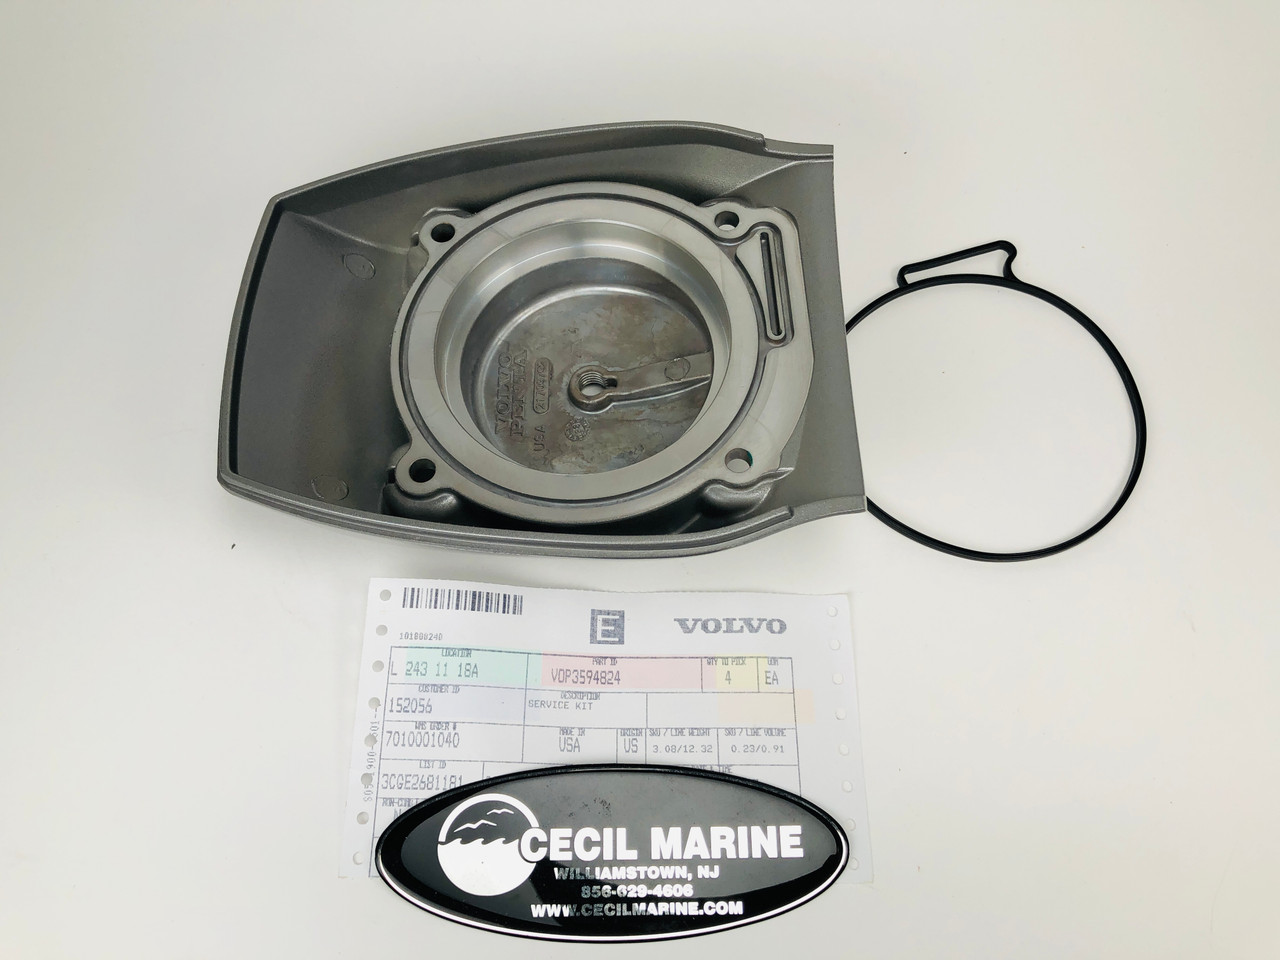 $389.99*GENUINE VOLVO no tax* UPPER DRIVE TOP COVER & GASKET SERVICE KIT( Old part number 3842916 & 21709796 ) 3594824 *In stock & ready to ship!